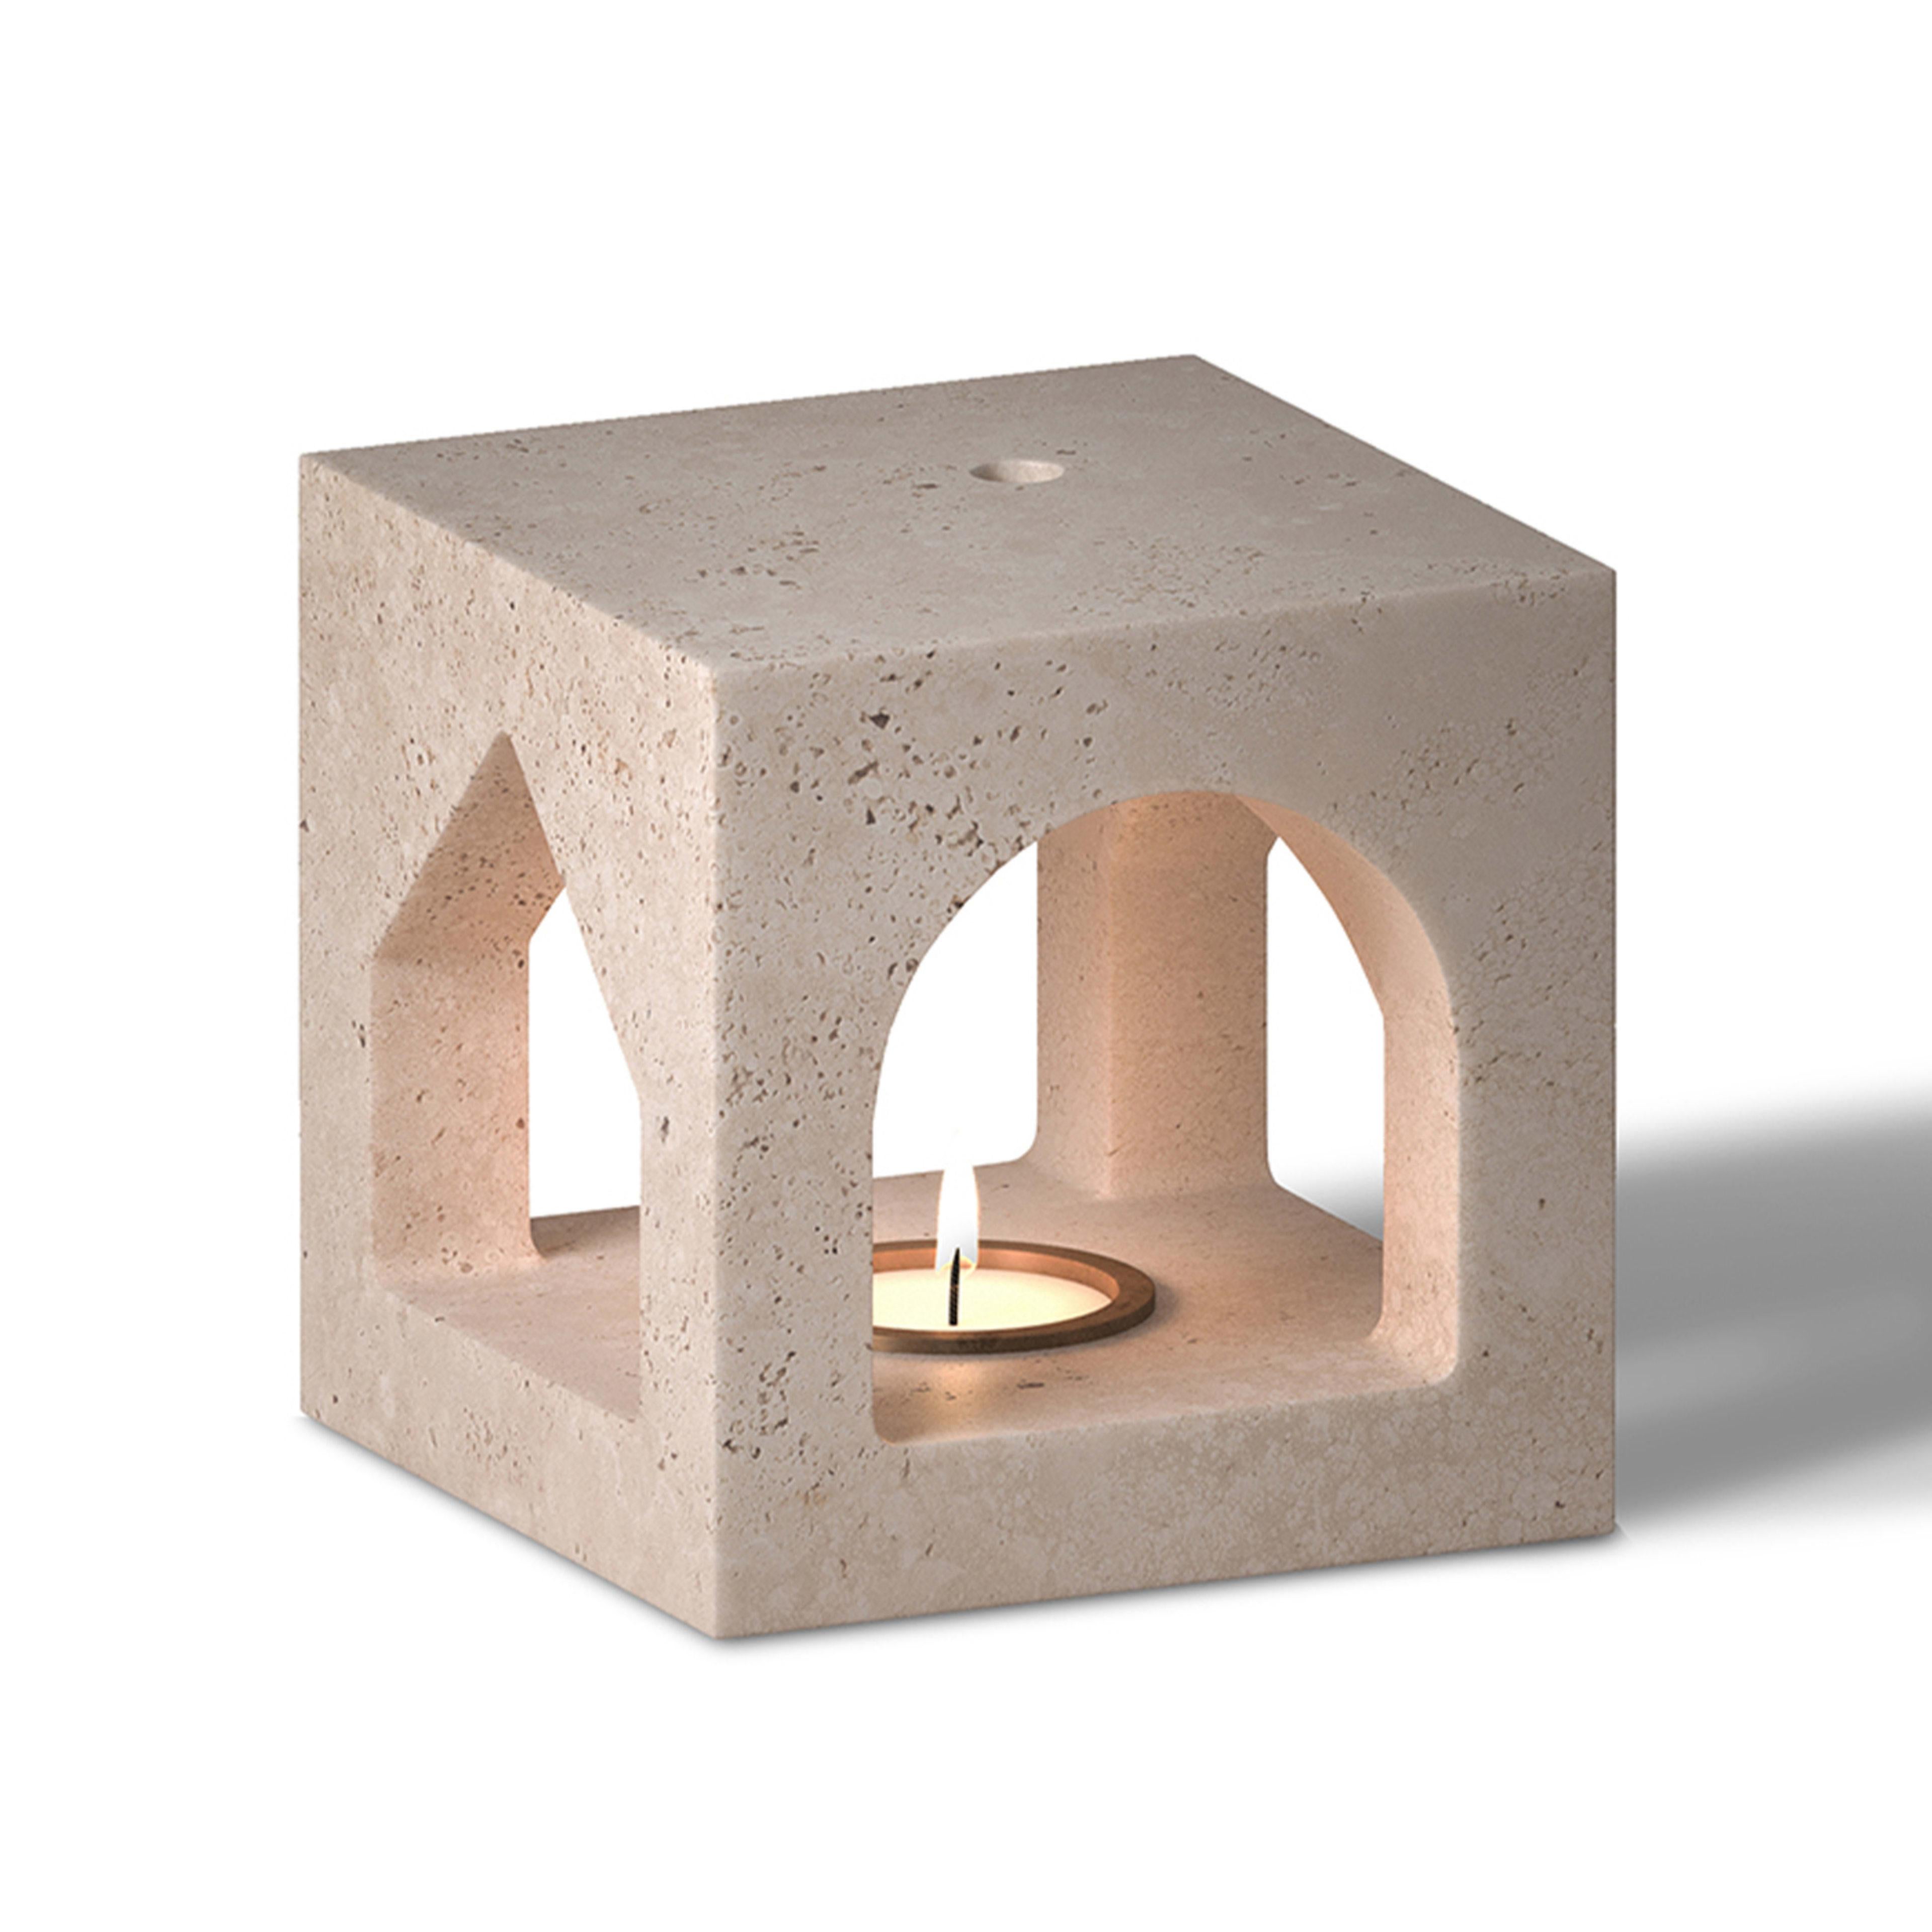 The Village - MA House Travertine Candleholder by Kengo Kuma In New Condition For Sale In Milan, IT